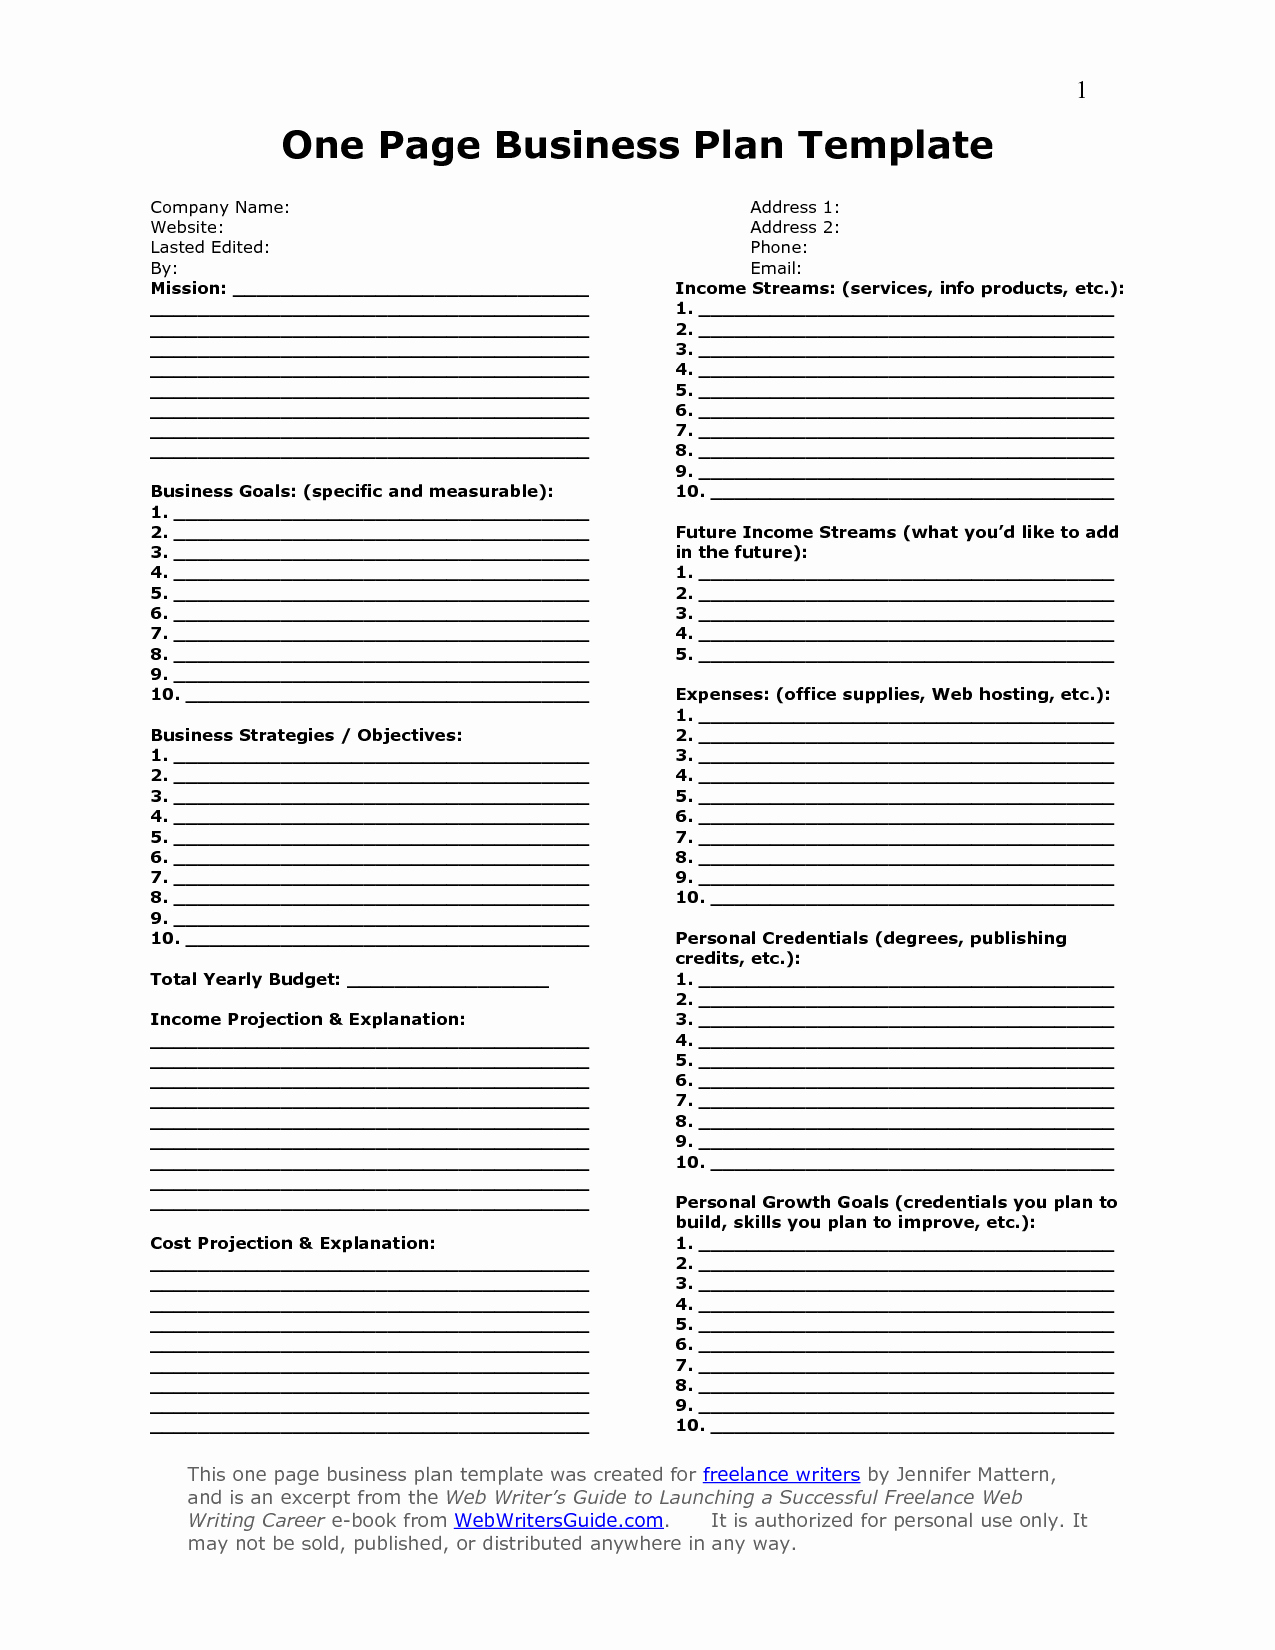 One Page Proposal Template Doc Fresh Free E Page Business Plan Template